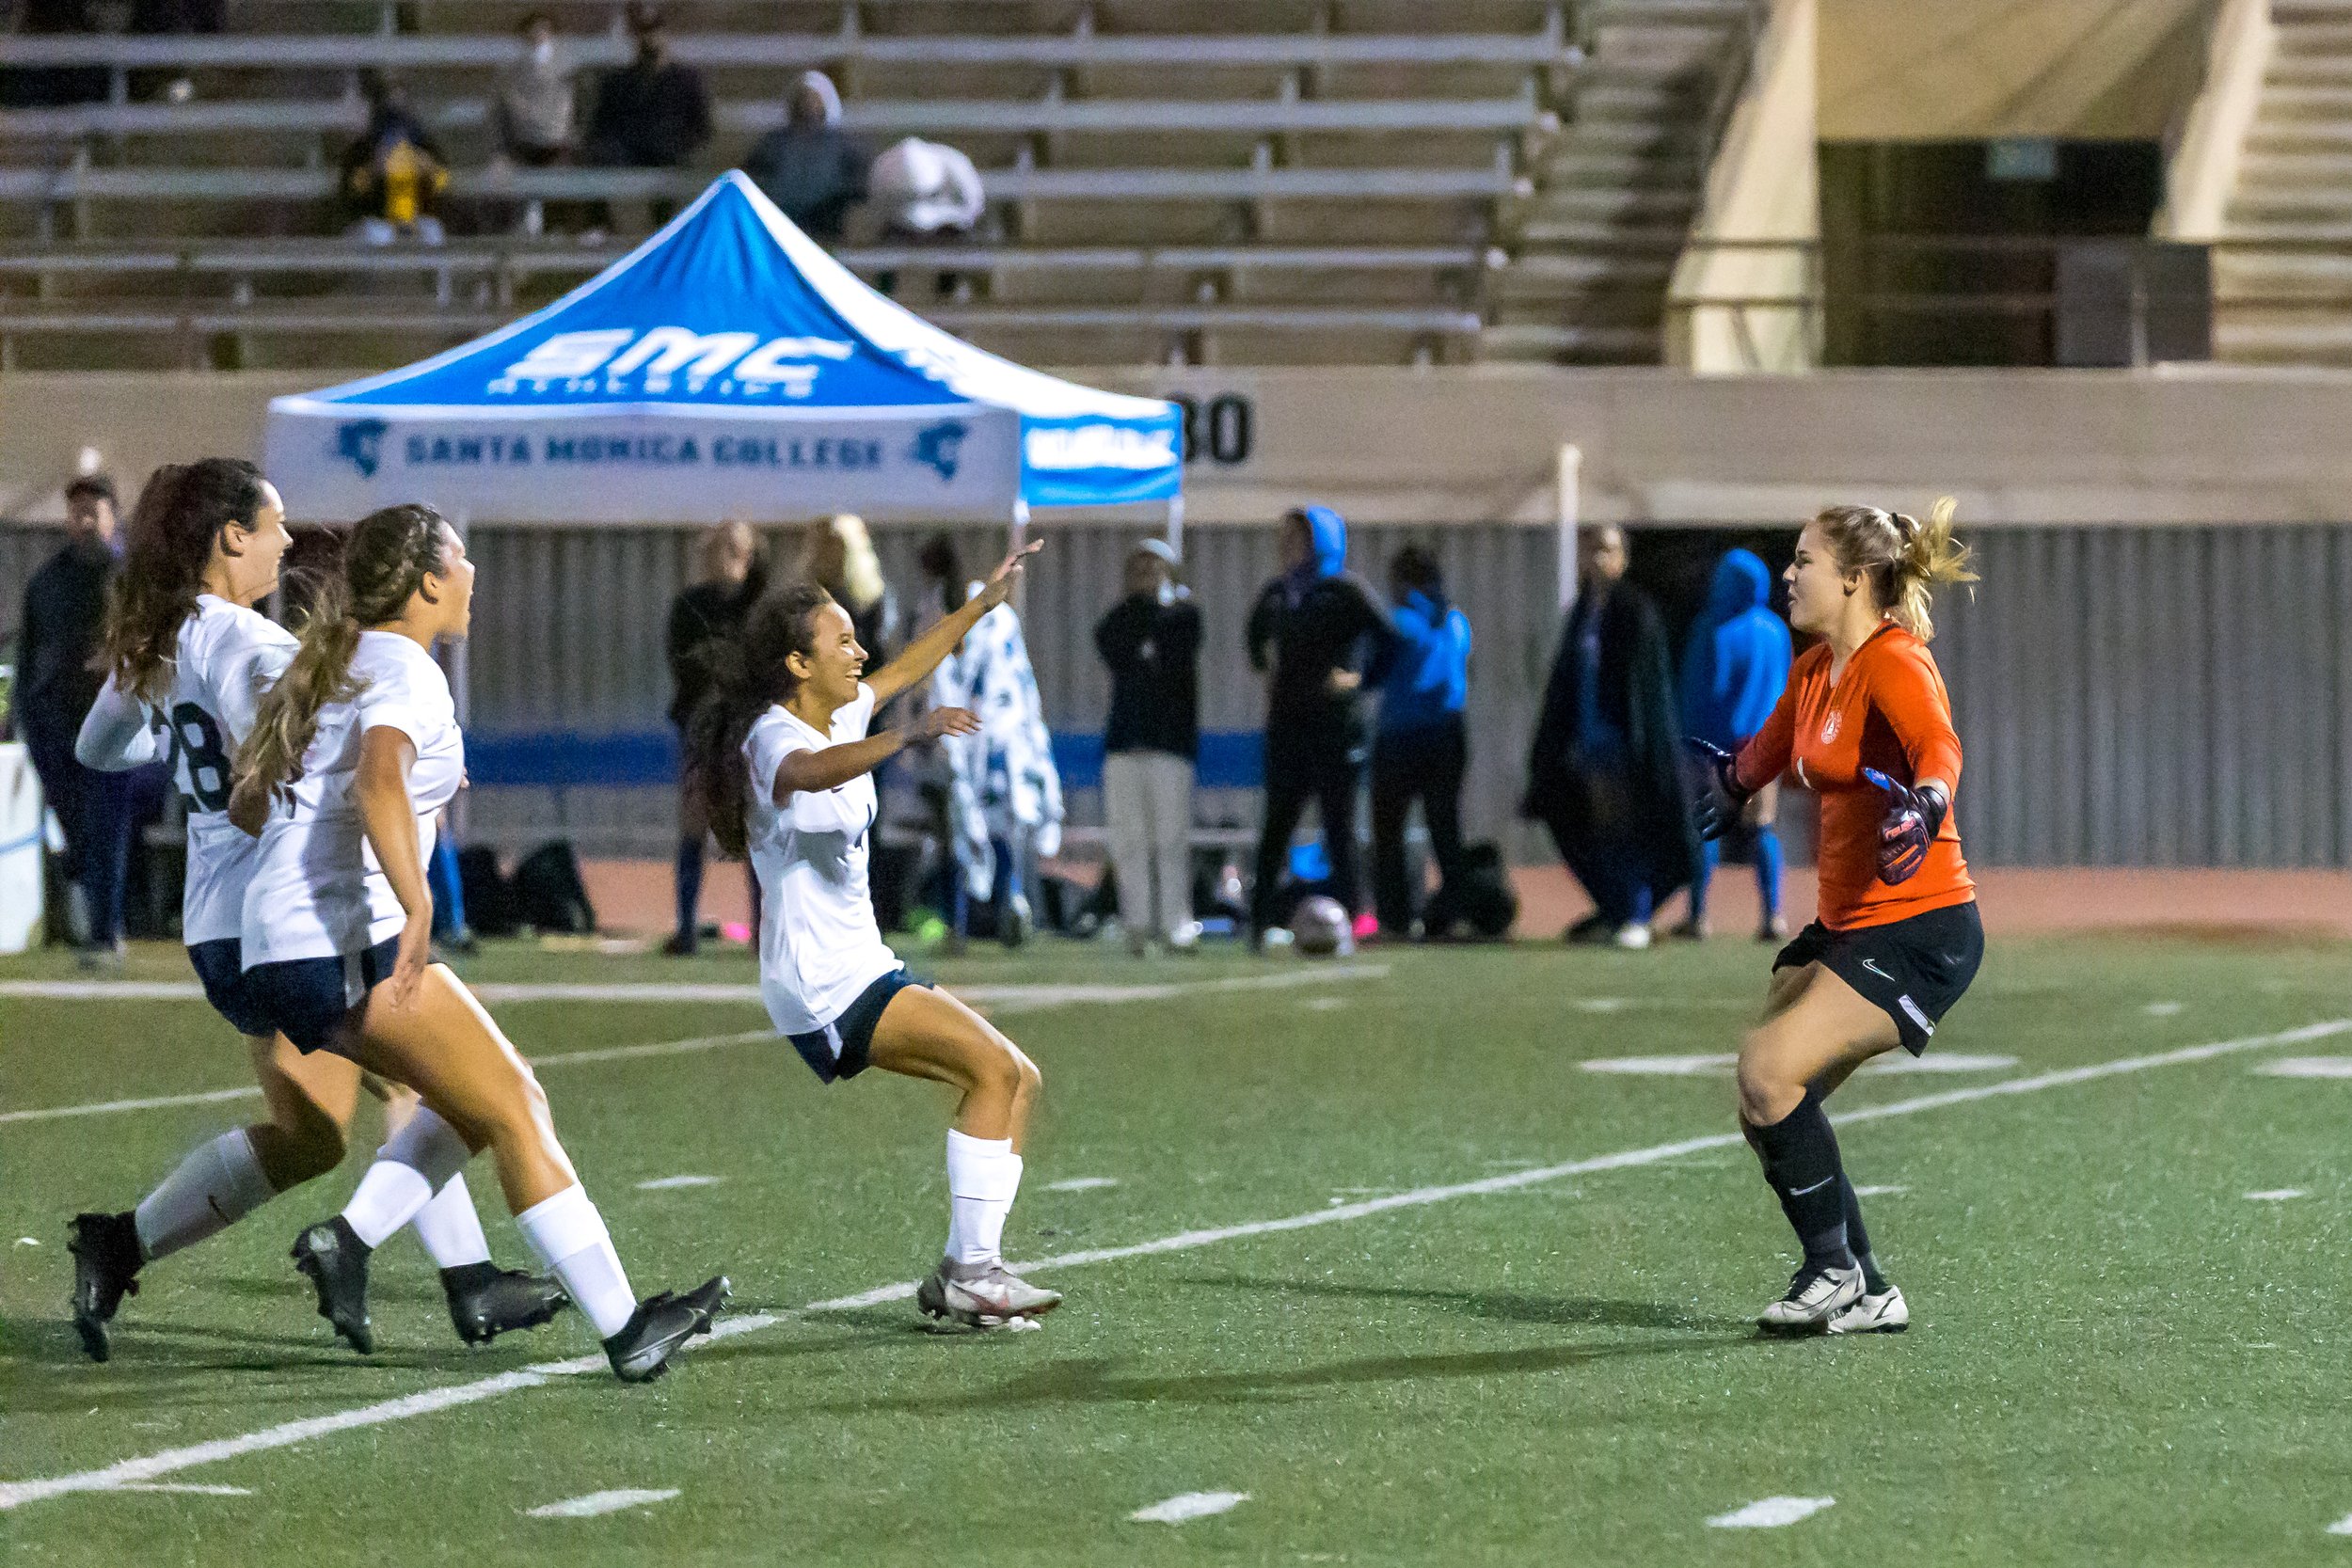  Freshman goalkeeper McKenna Morey celebrates with her teammates after she shots the game winning penalty for the El Camino College Warriors. Santa Monica College played against El Camino College in a California Community College Women's Soccer South